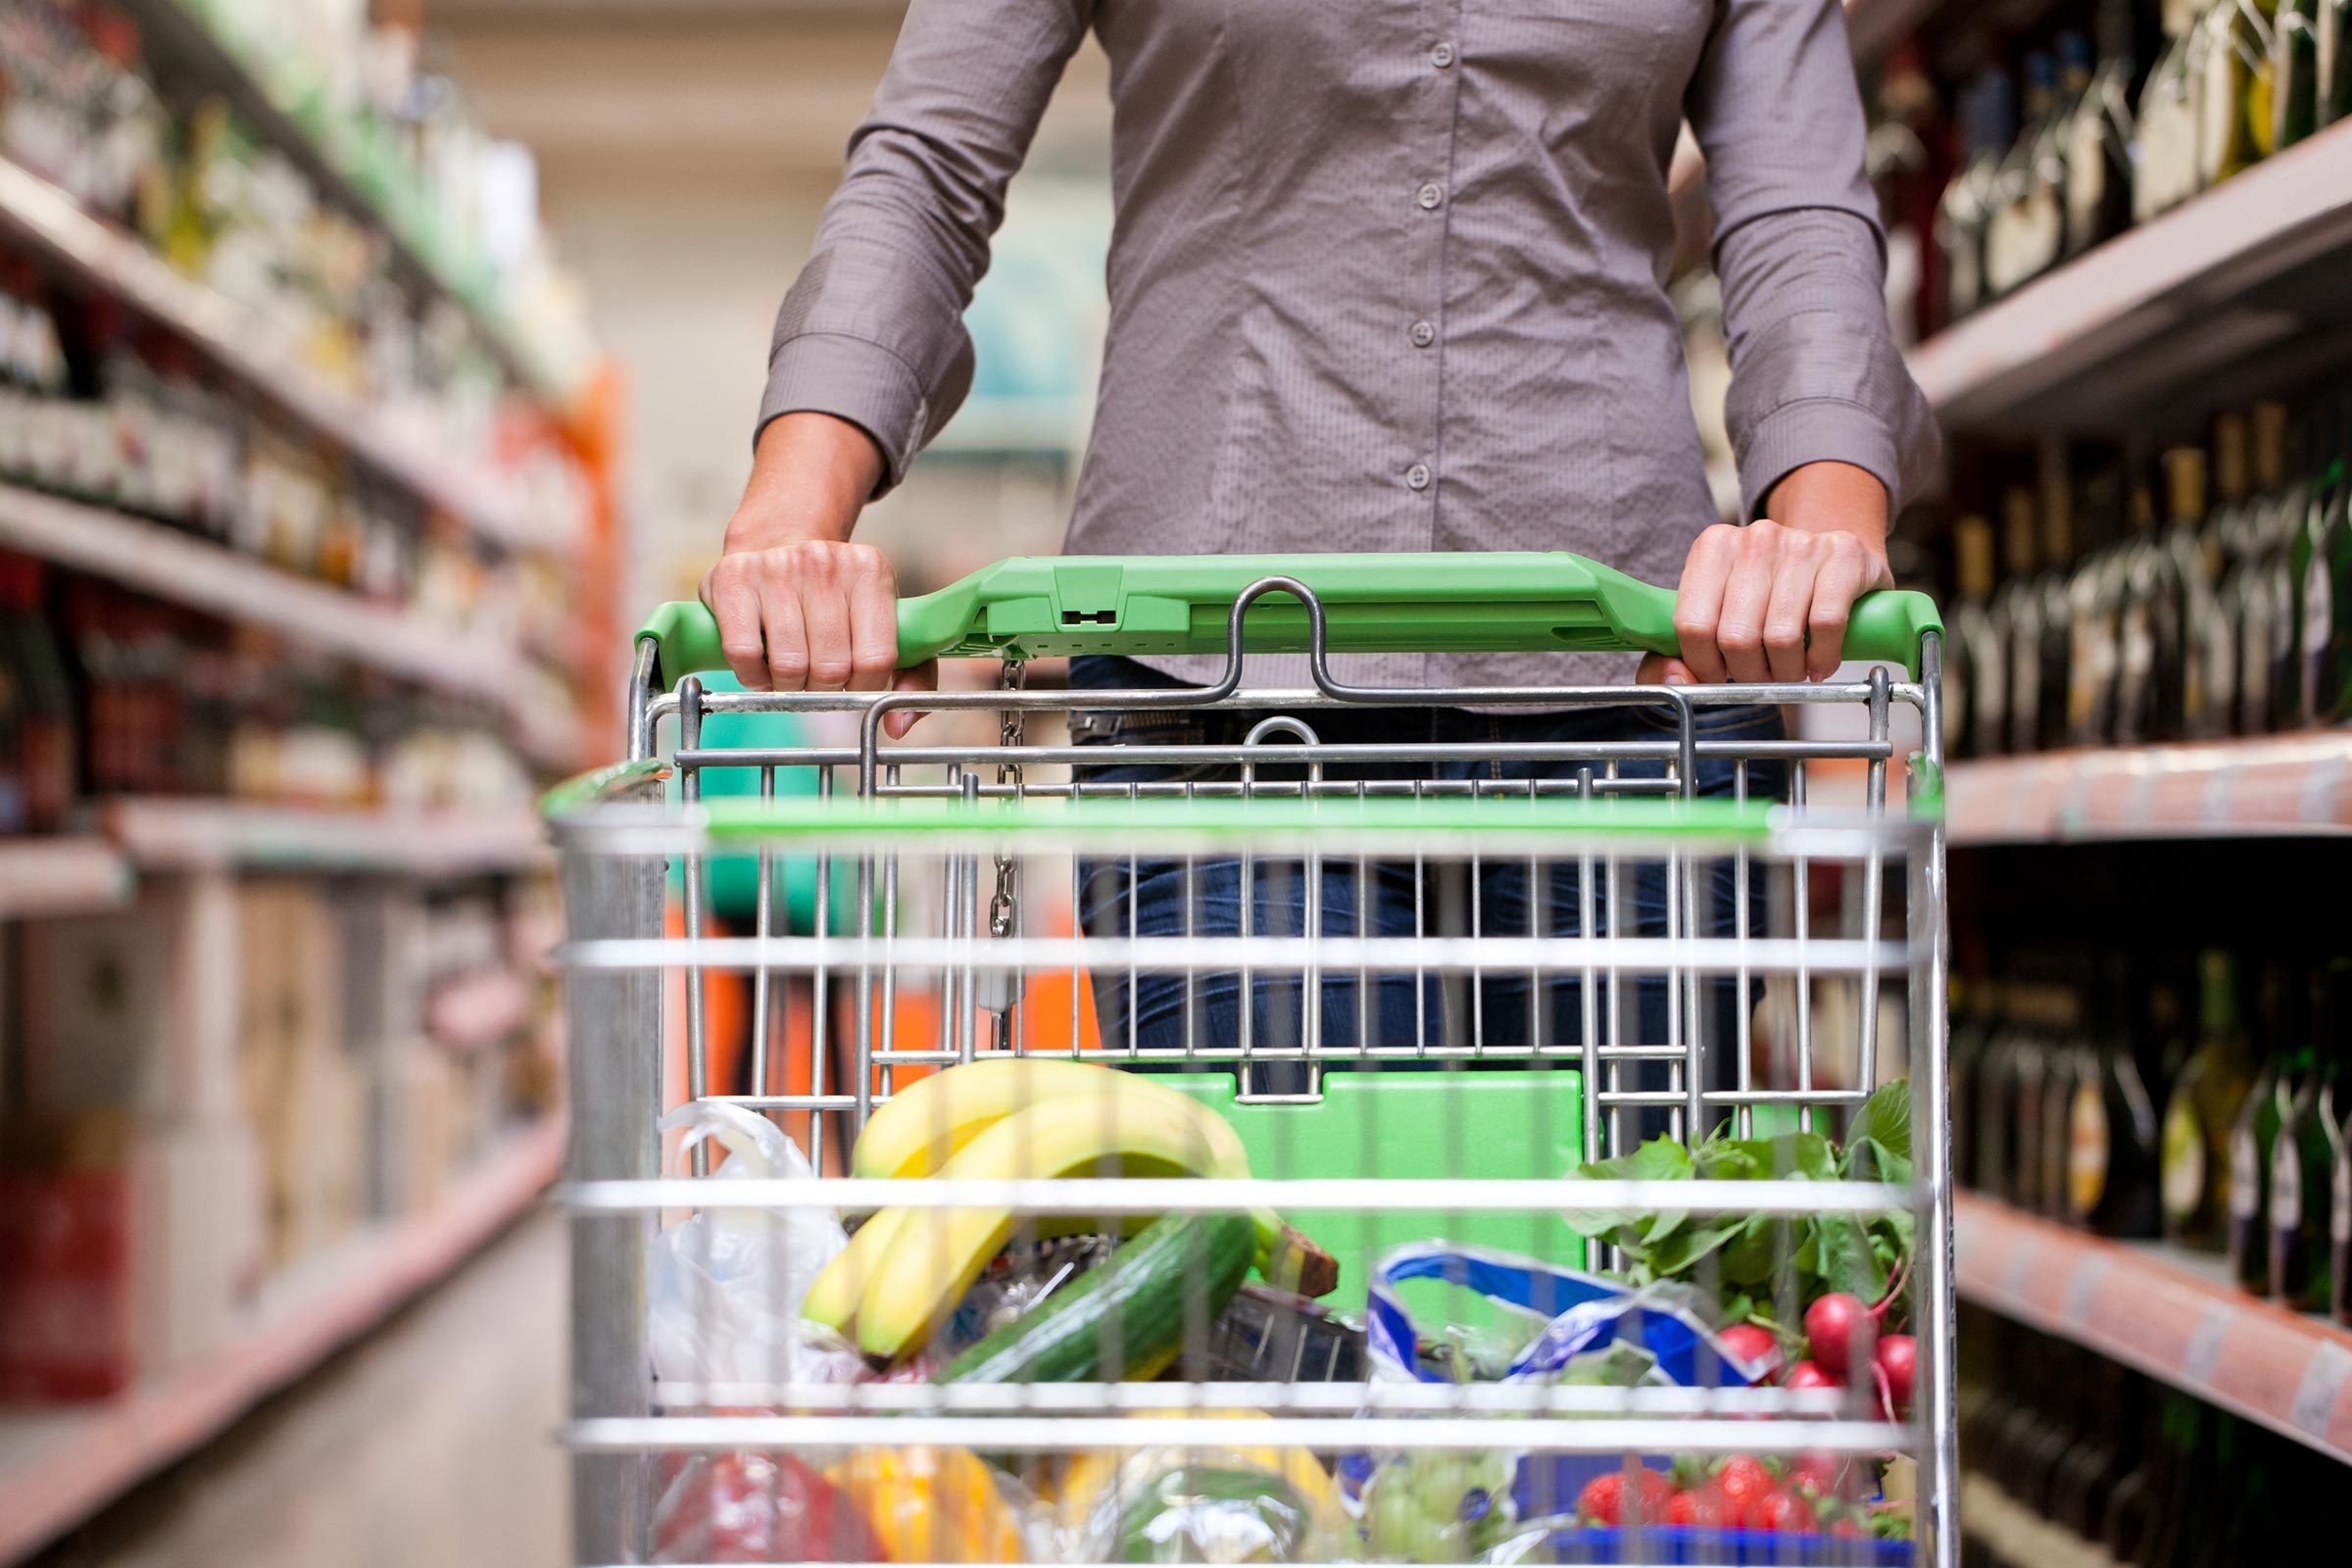 How to Bulk Buy Food And Save Money on the Groceries